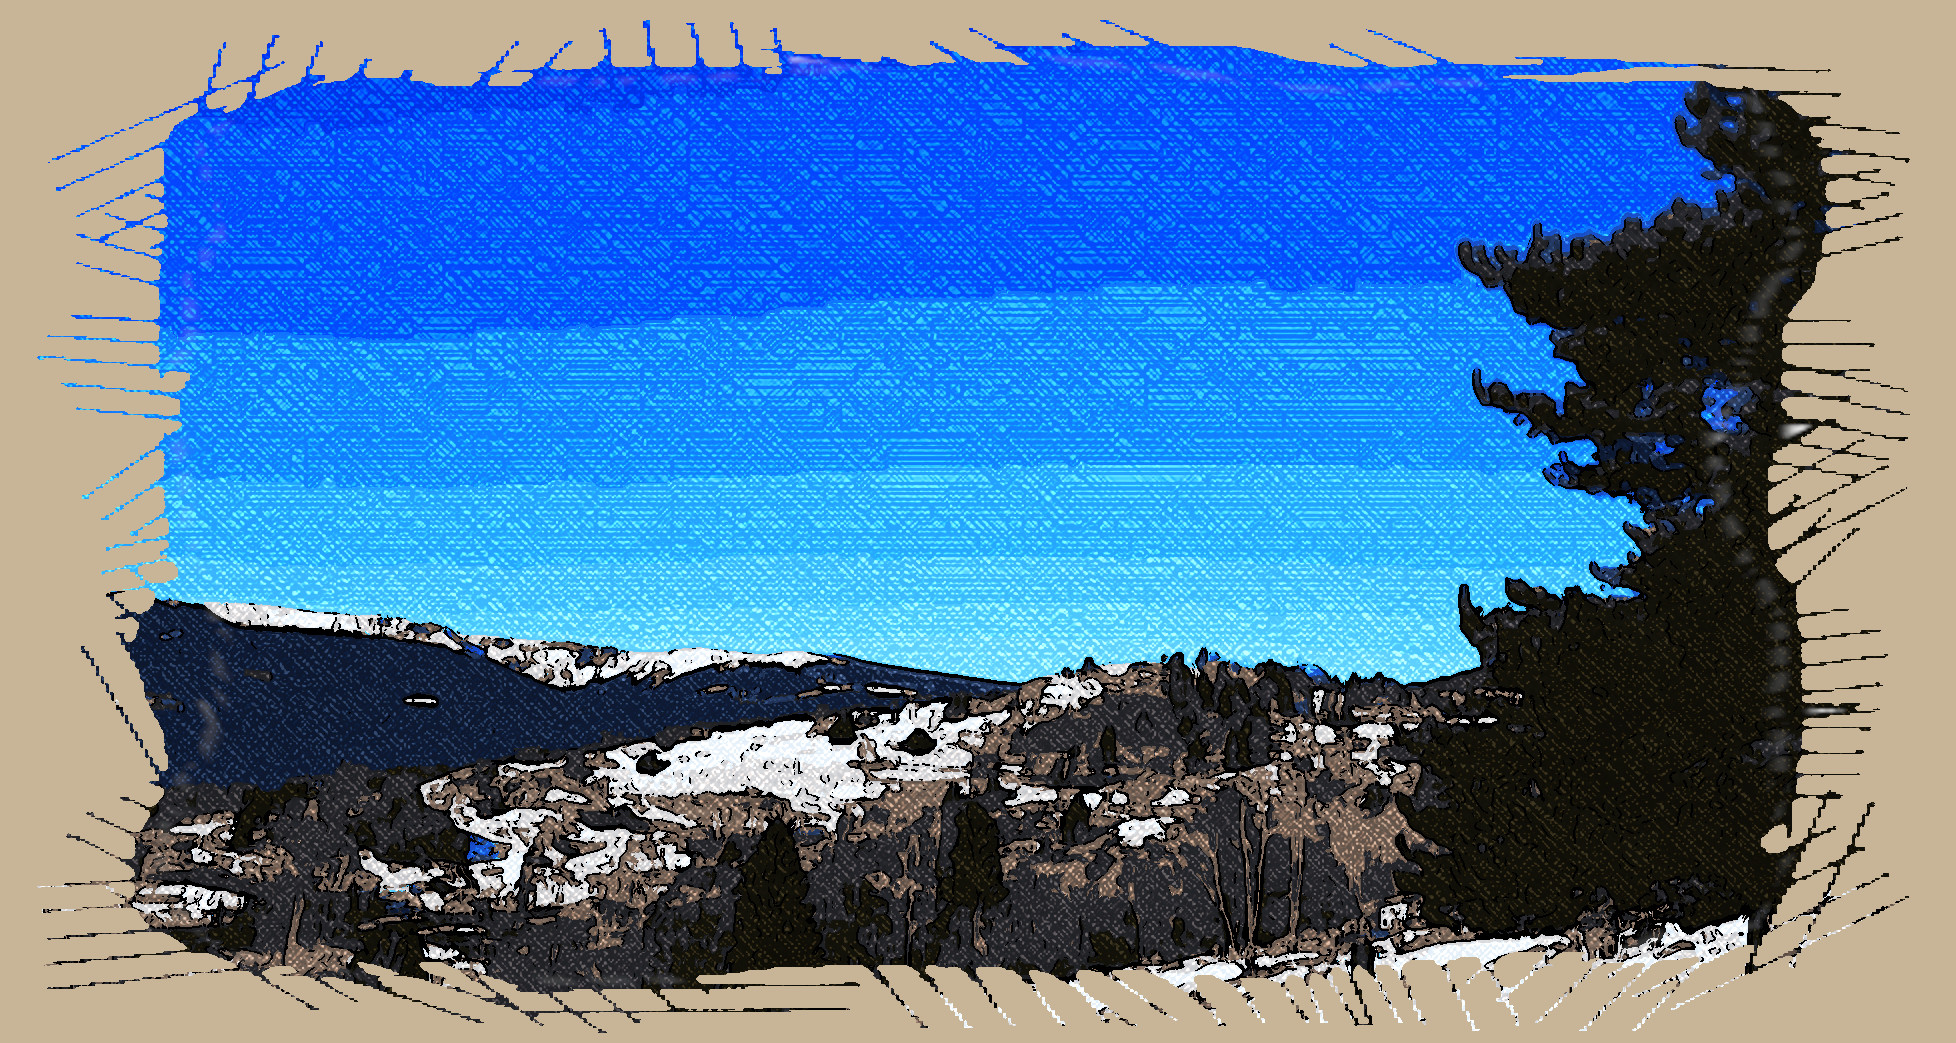 2022-04-12 06-26-54stock_anita_creation_paysage_hiver_by_anita_creations_dey3un9-fullview as a drawing with texture coloree.jpeg